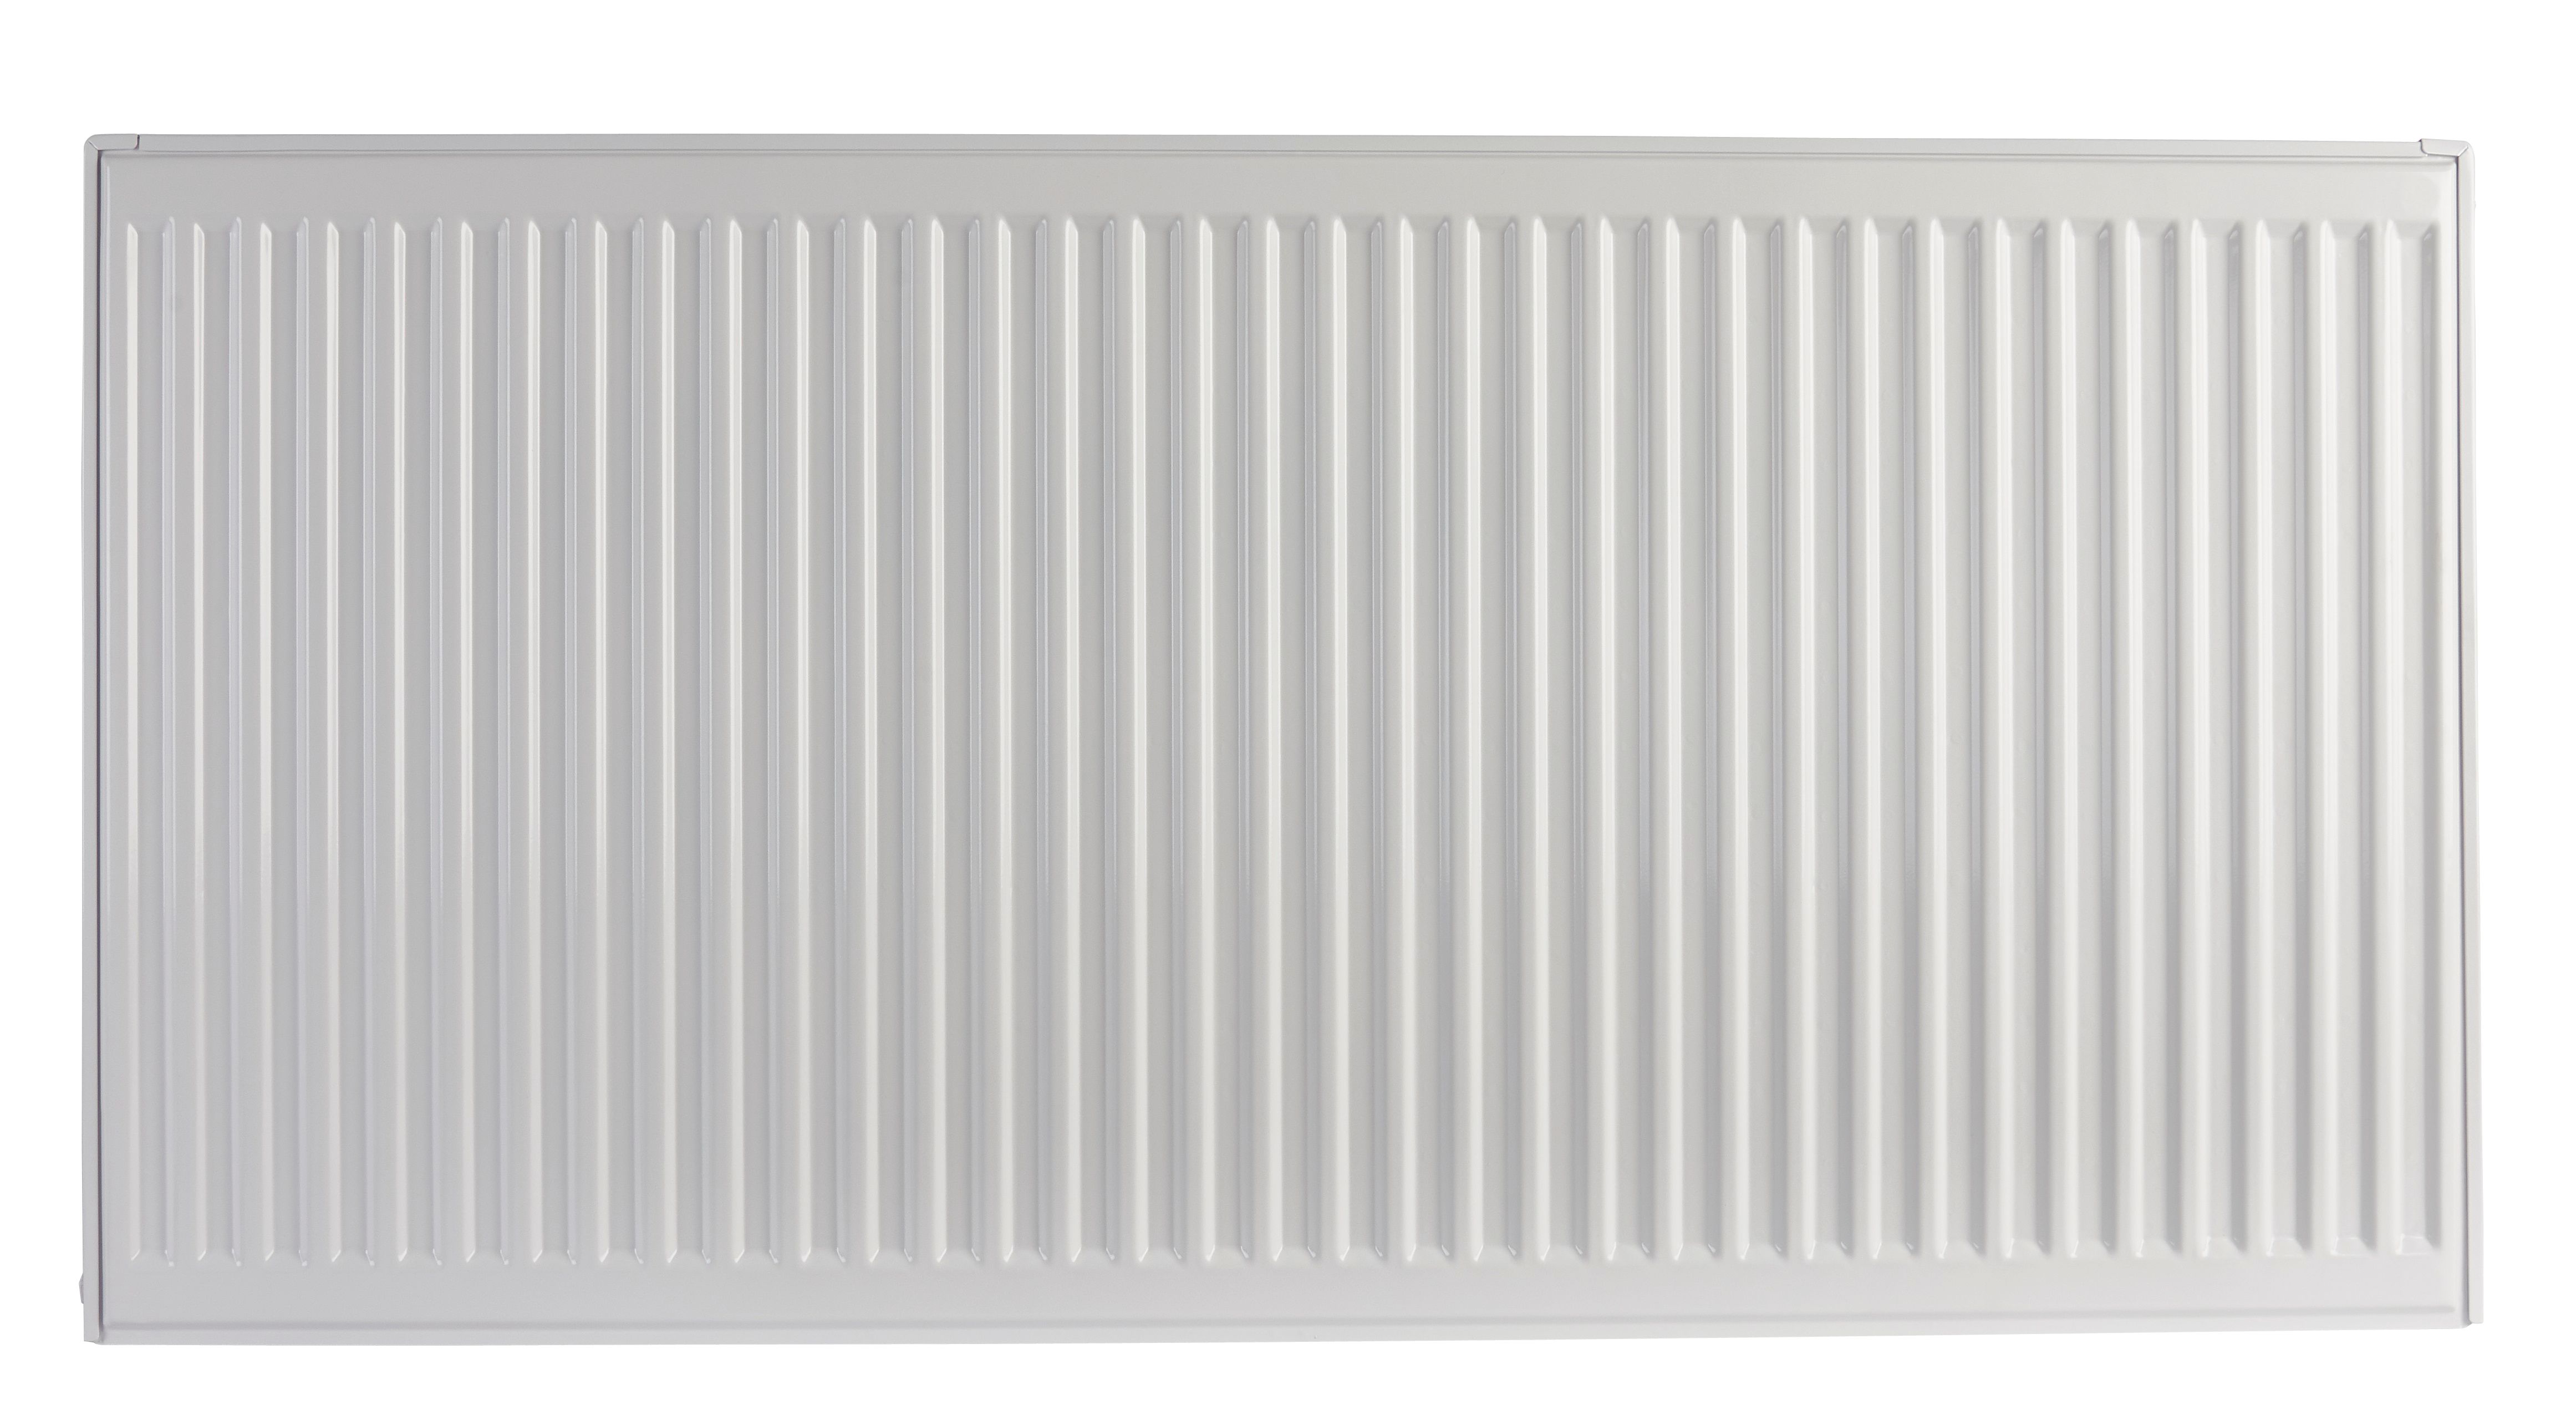 Image of Homeline by Stelrad 600 x 900mm Type 21 Double Panel Plus Single Convector Radiator